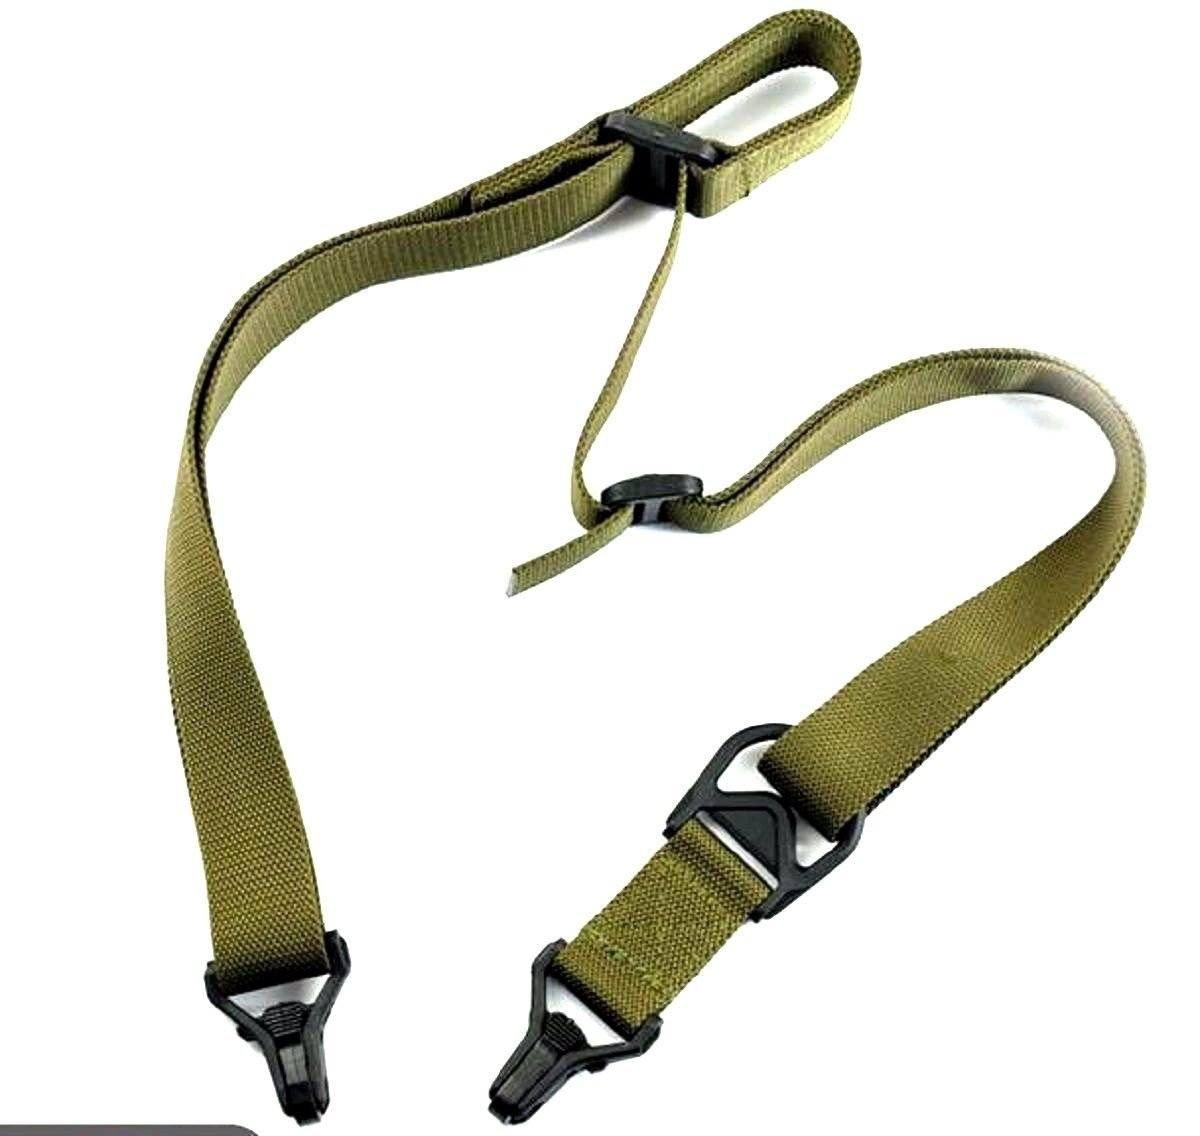 Tactical 1 or 2 point Sling, Quick Action Adjustment For AR15 and many other types (Color:Tan) Slings & Swivels Green Blob Outdoors 